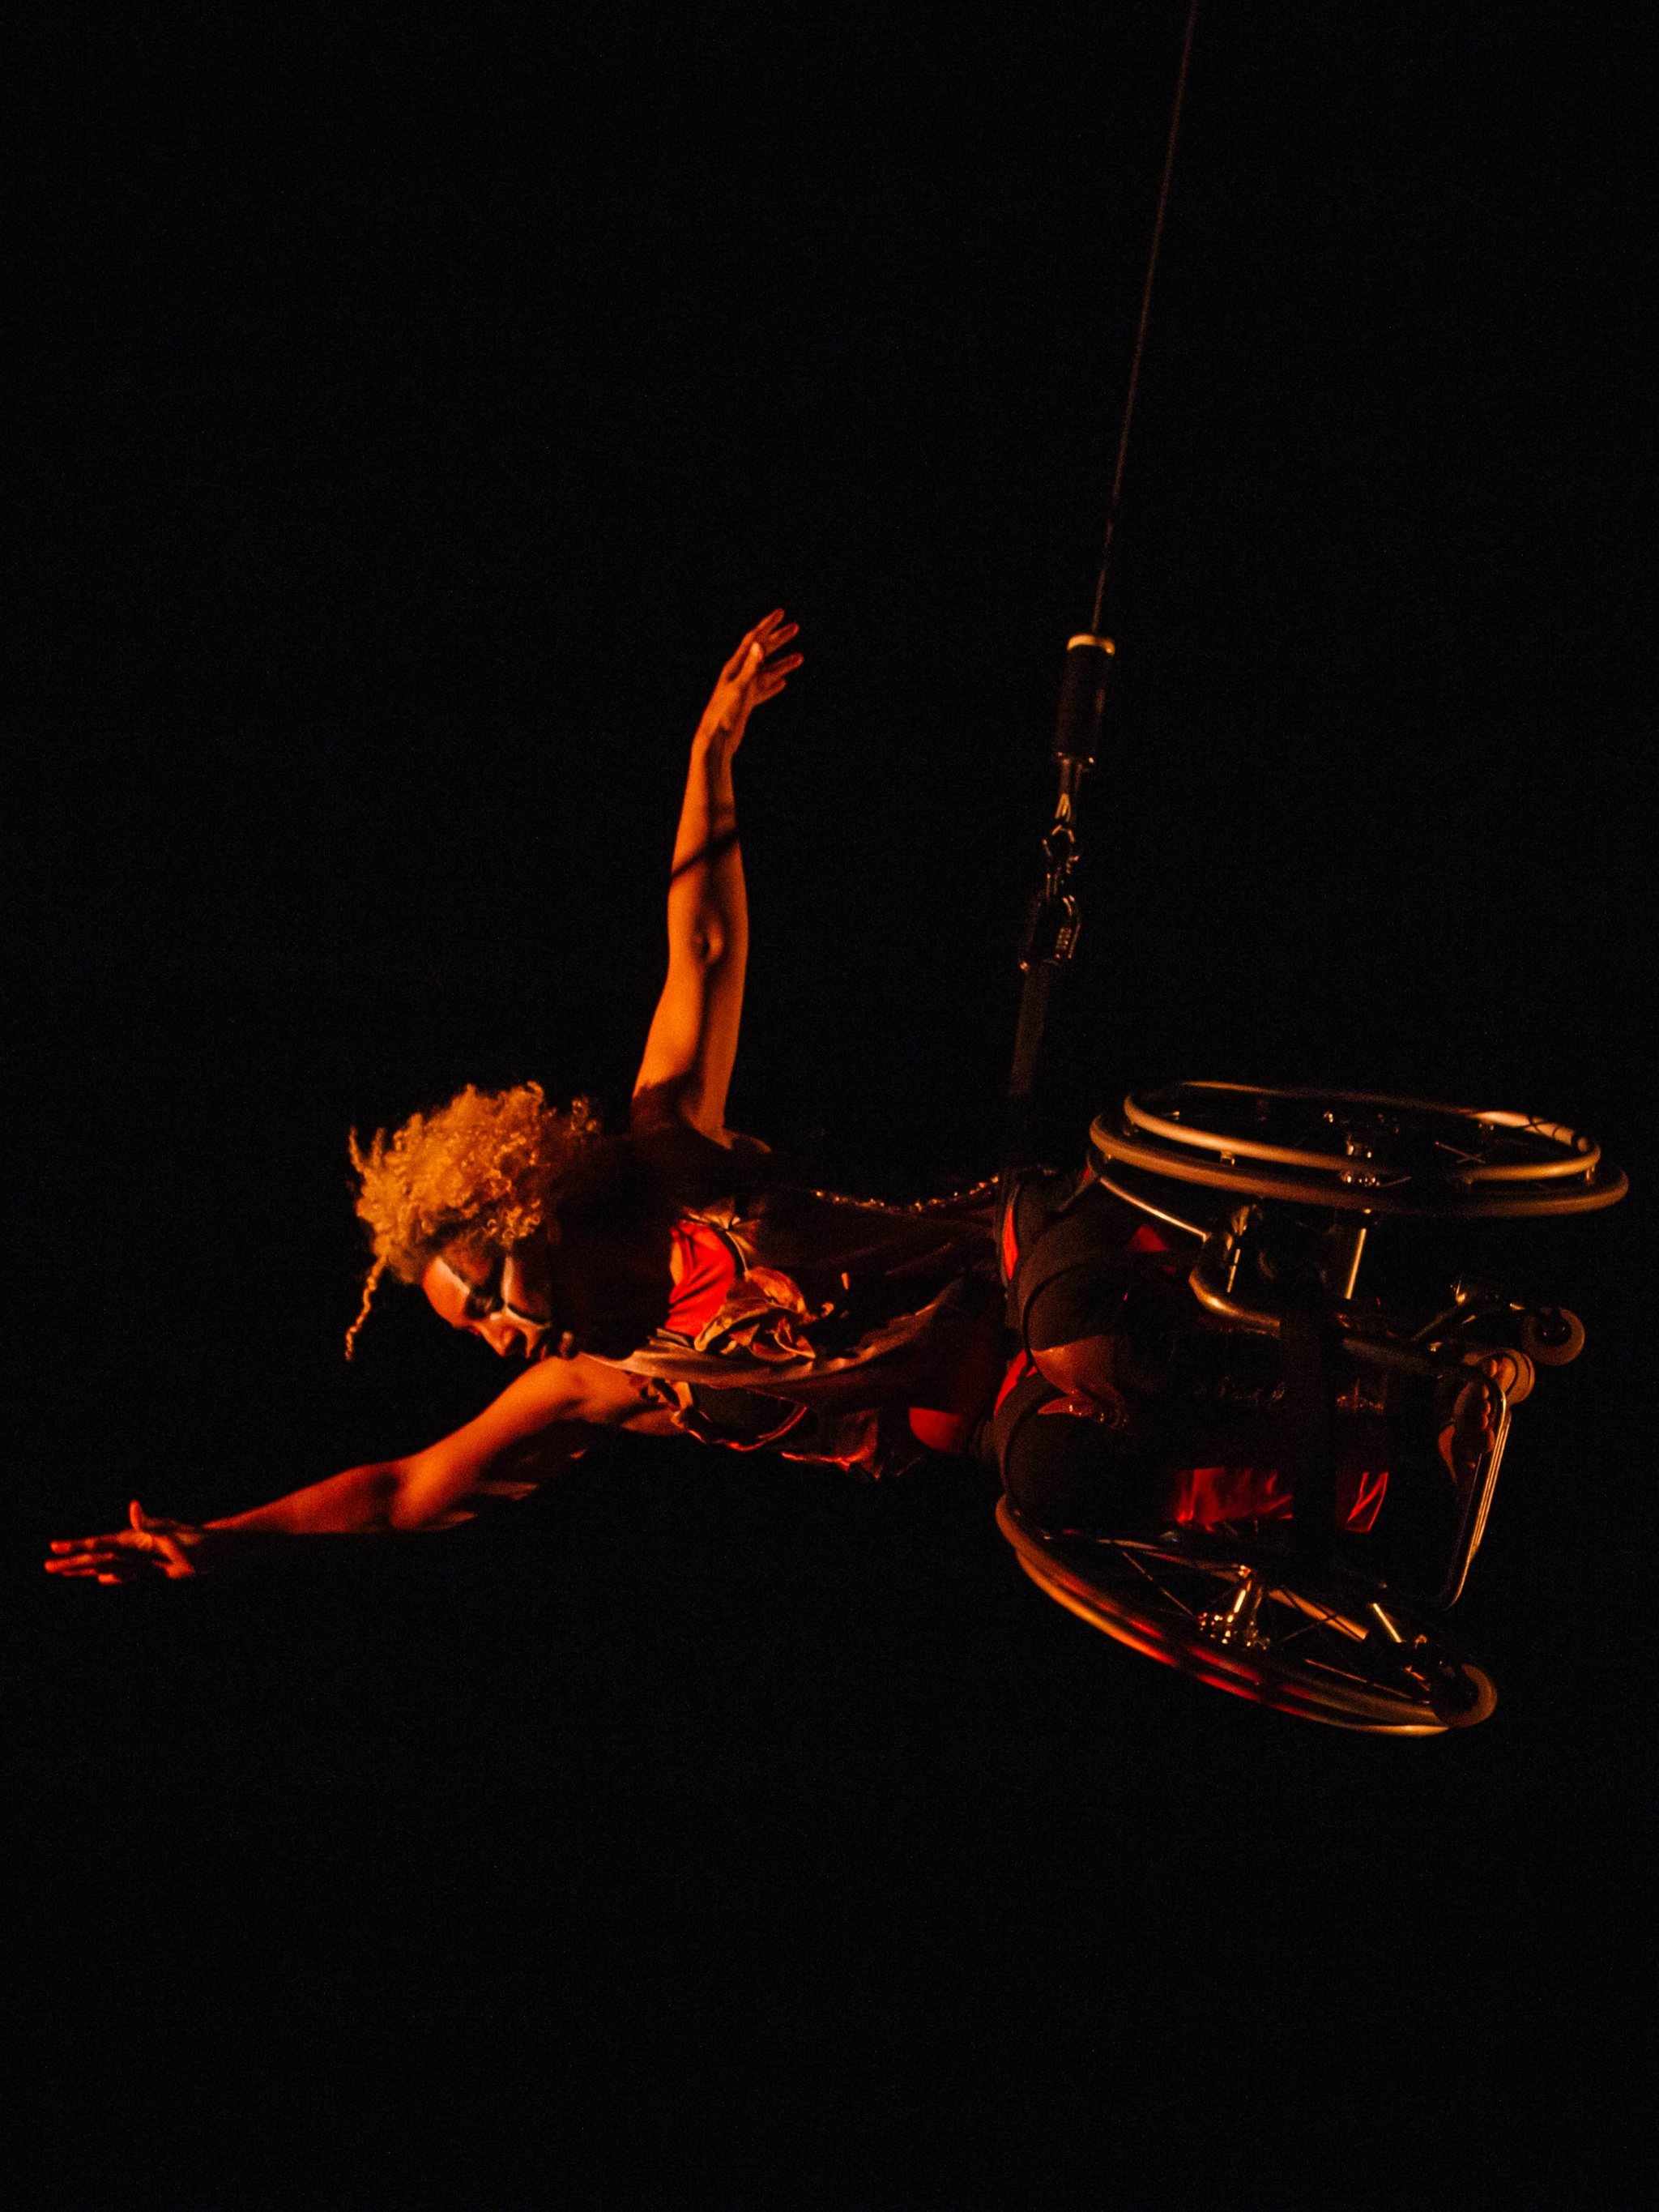 Alice Sheppard flies in her wheelchair, body parallel to the stage as she reaches one arm high and extends the other to the side. She dances in a glowing red shadow. She is a multiracial Black woman with coffee colored skin and short curly hair; she wears a red and gold bodysuit, black and white lines adorn her face.